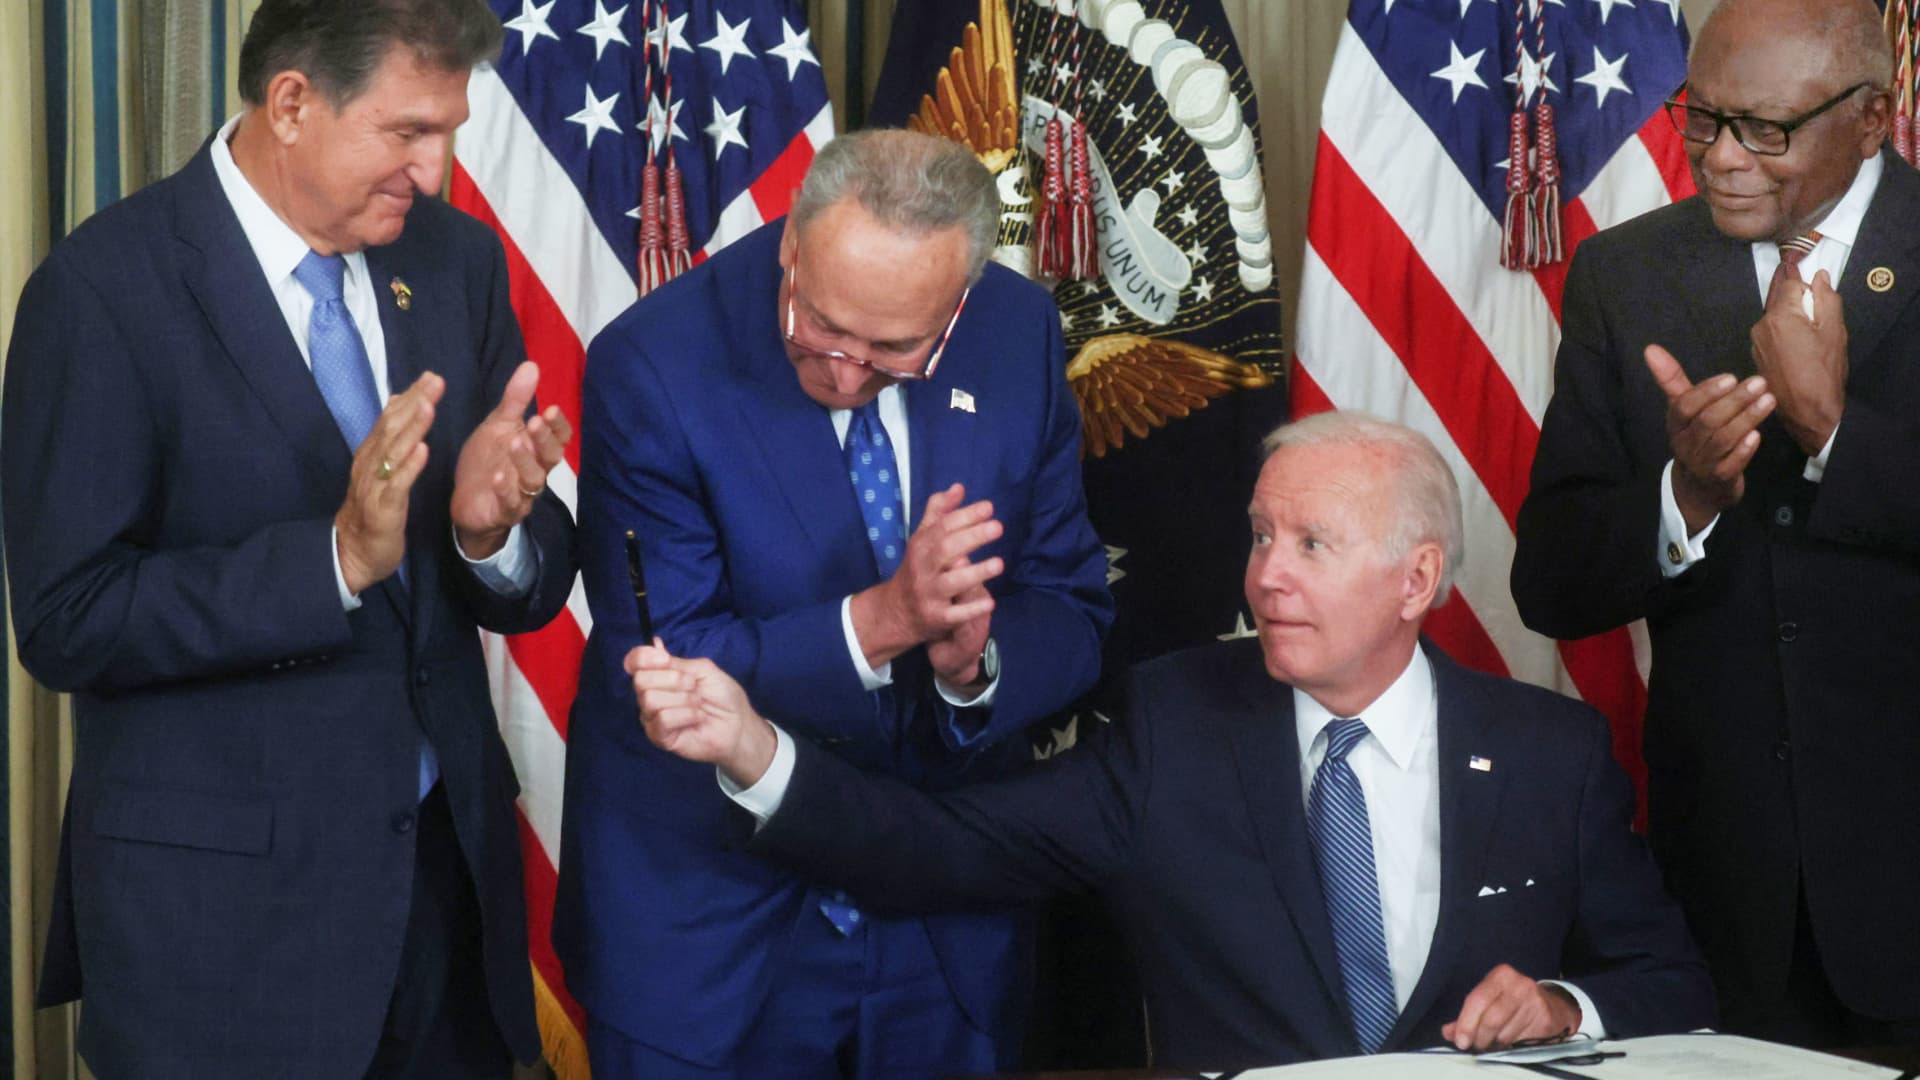 Biden signs Inflation Reduction Act into law, setting 15% minimum corporate tax rate